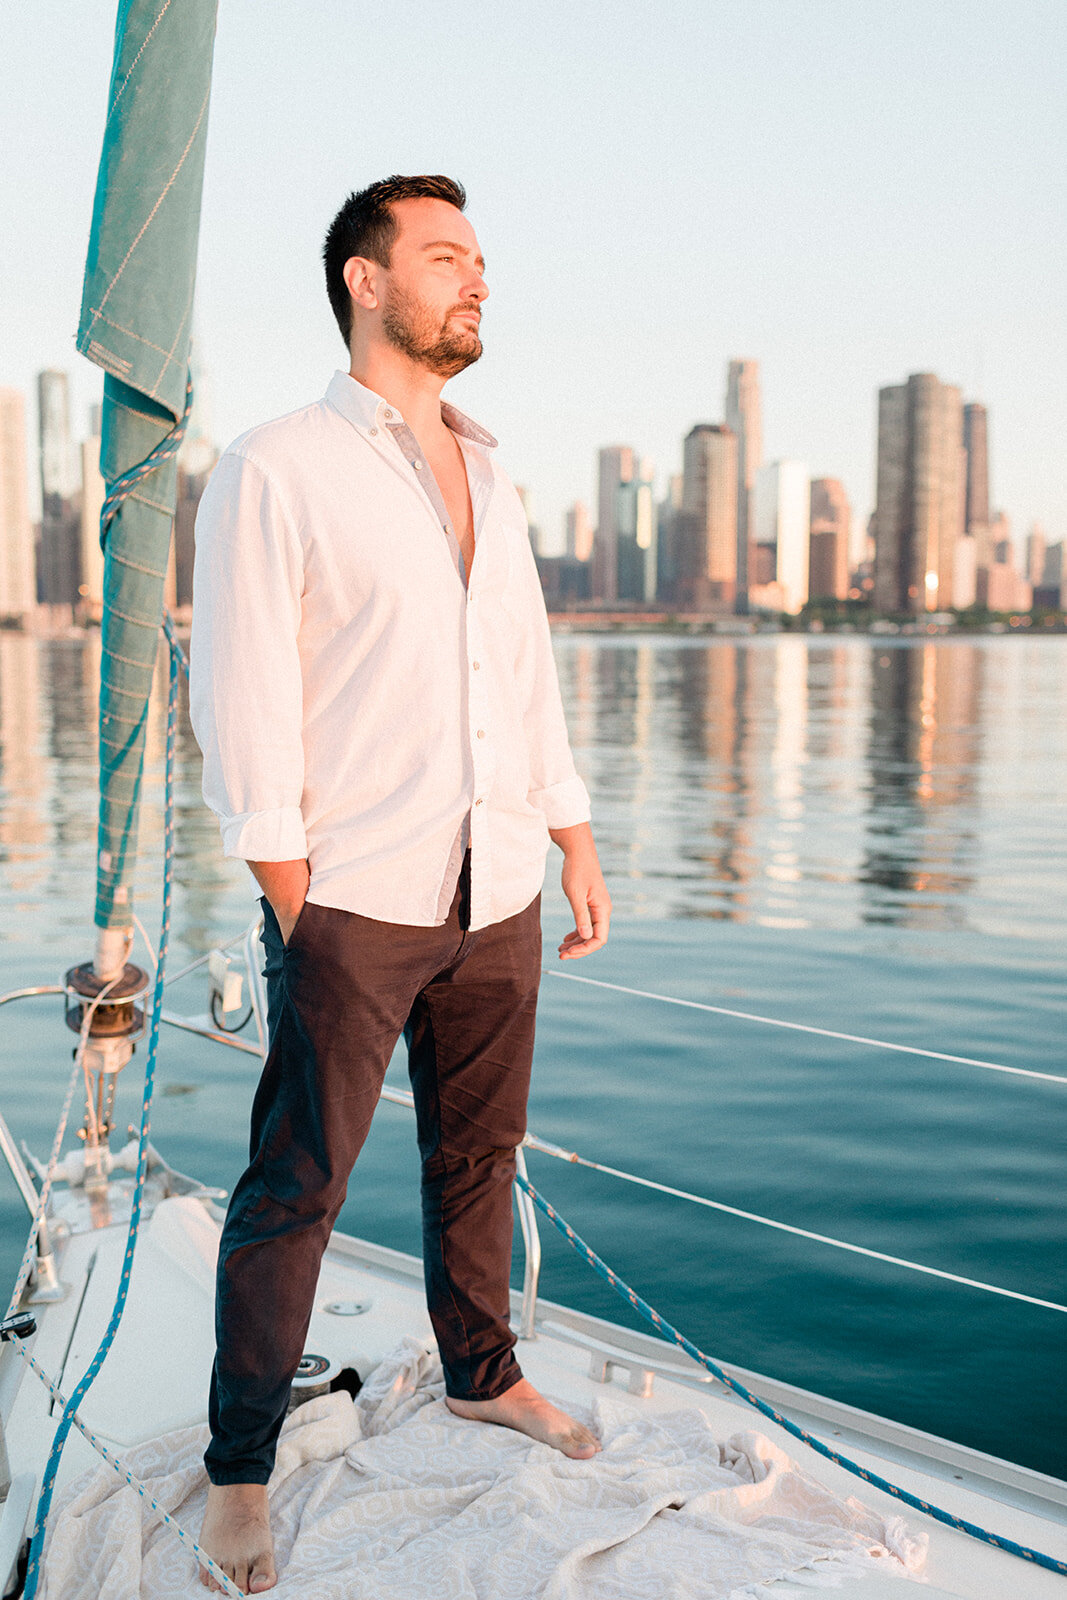 C+E_Chicago_Sailboat_Engagement_Session_by_Diana_Coulter-34